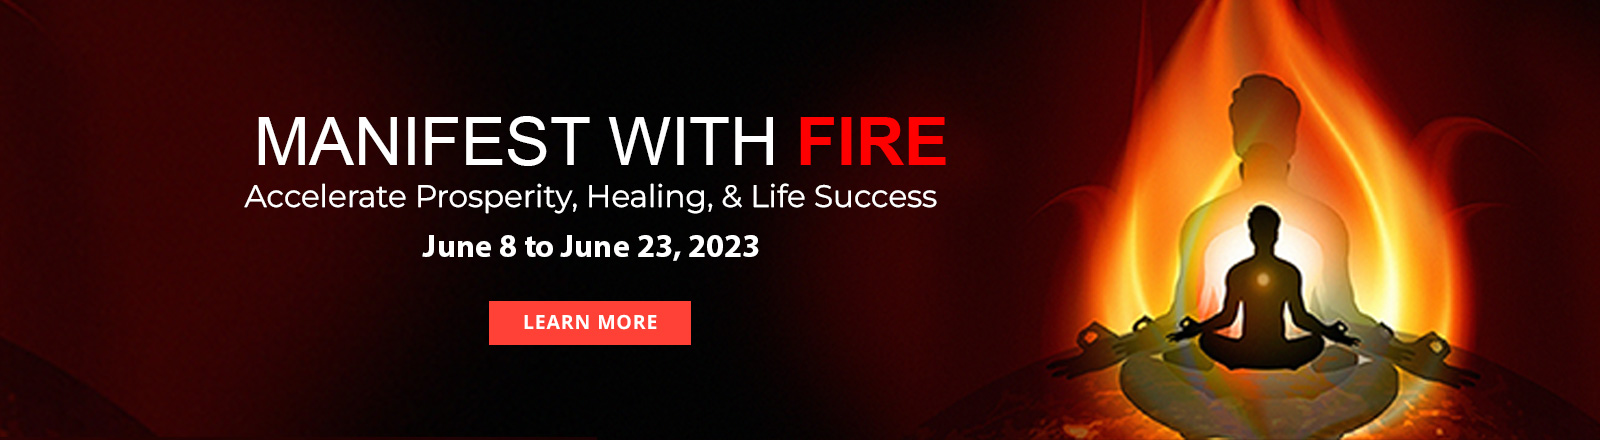 Manifest with Fire June